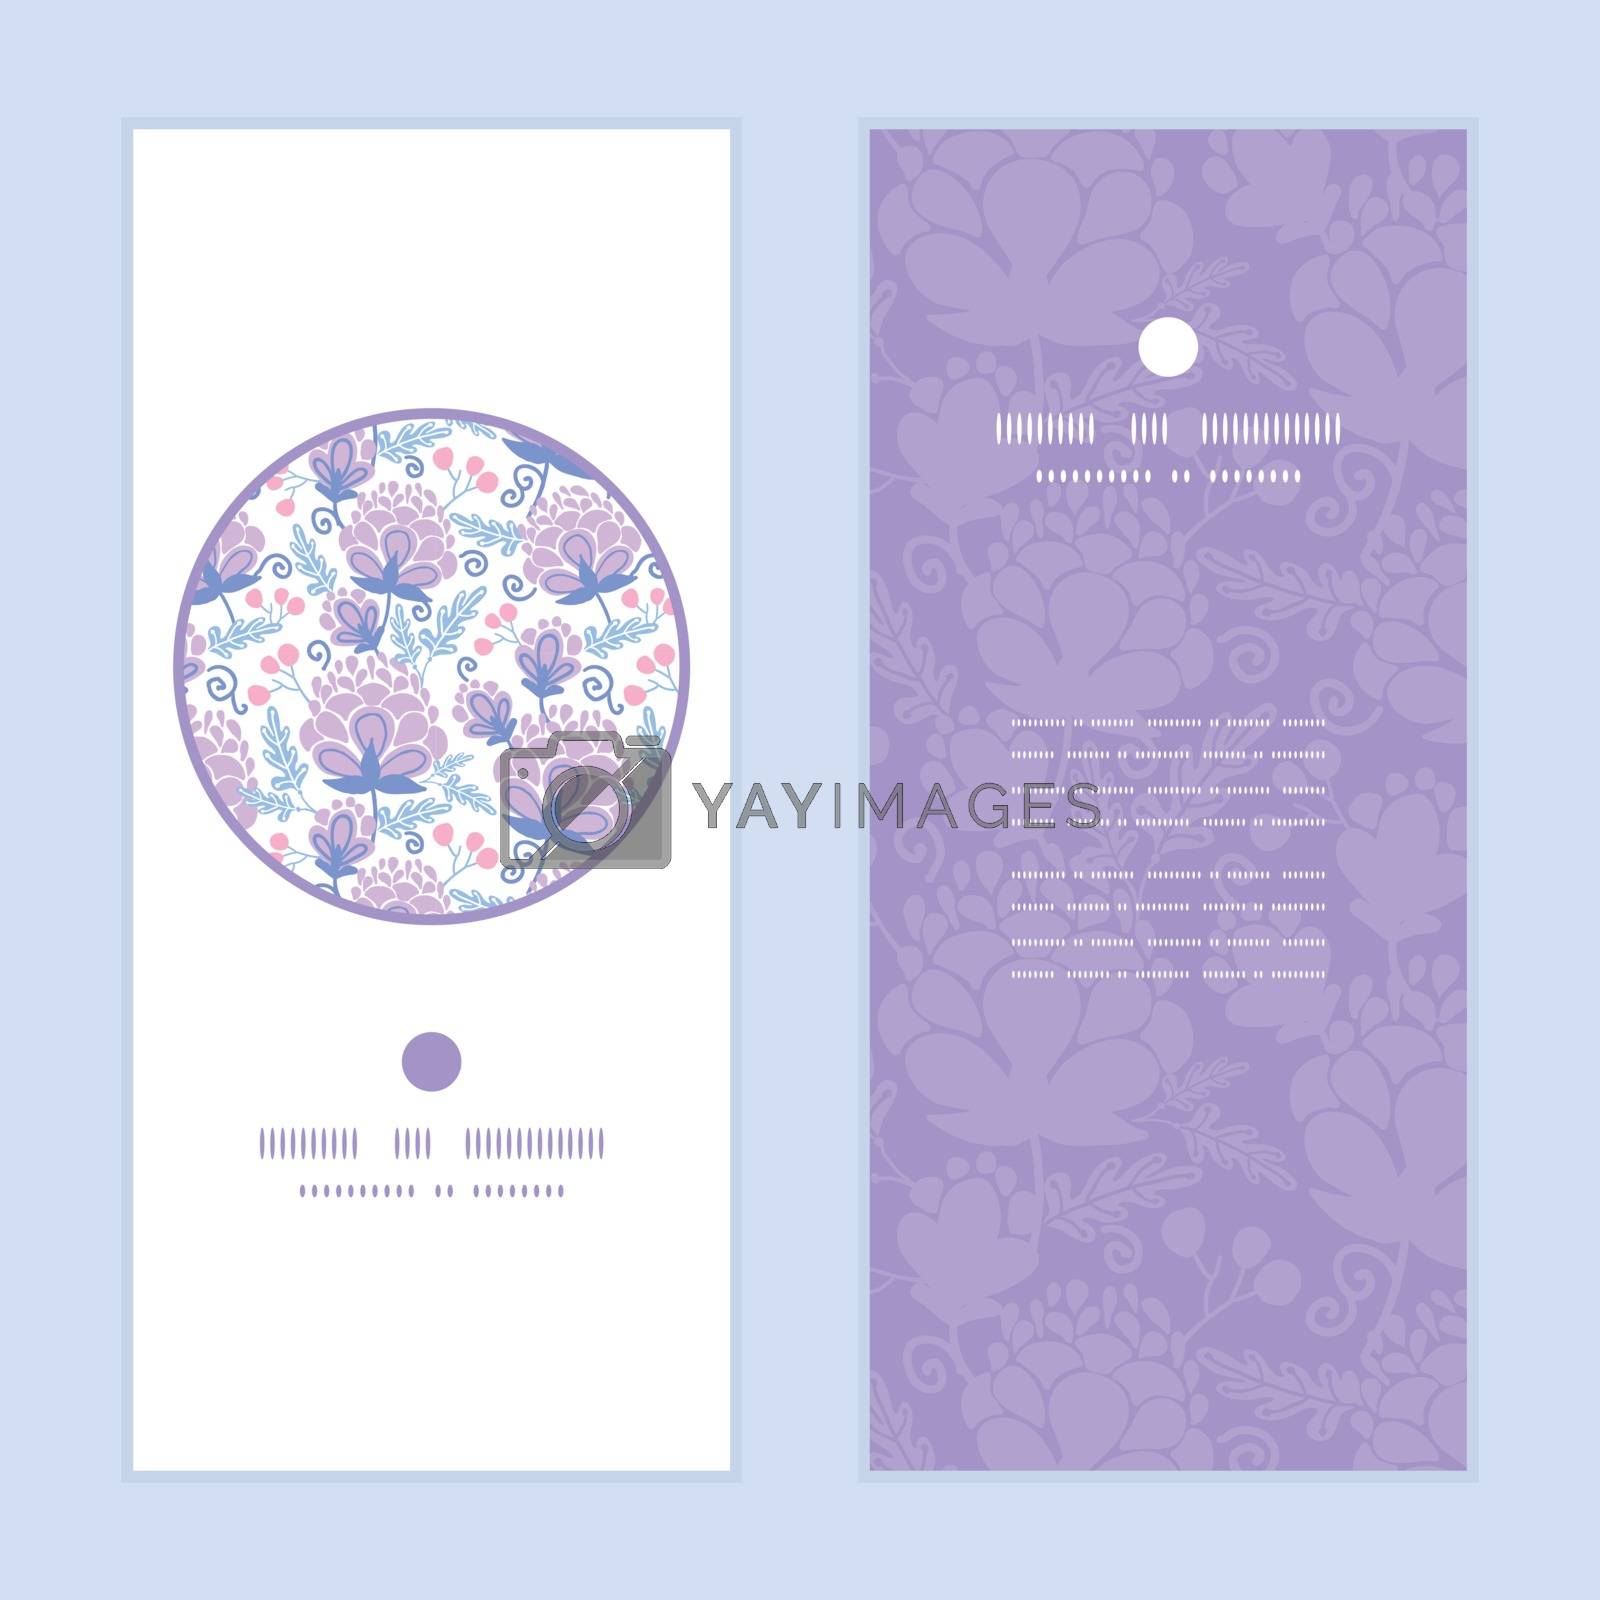 Royalty free image of Vector soft purple flowers vertical round frame pattern invitation greeting cards set by Oksancia